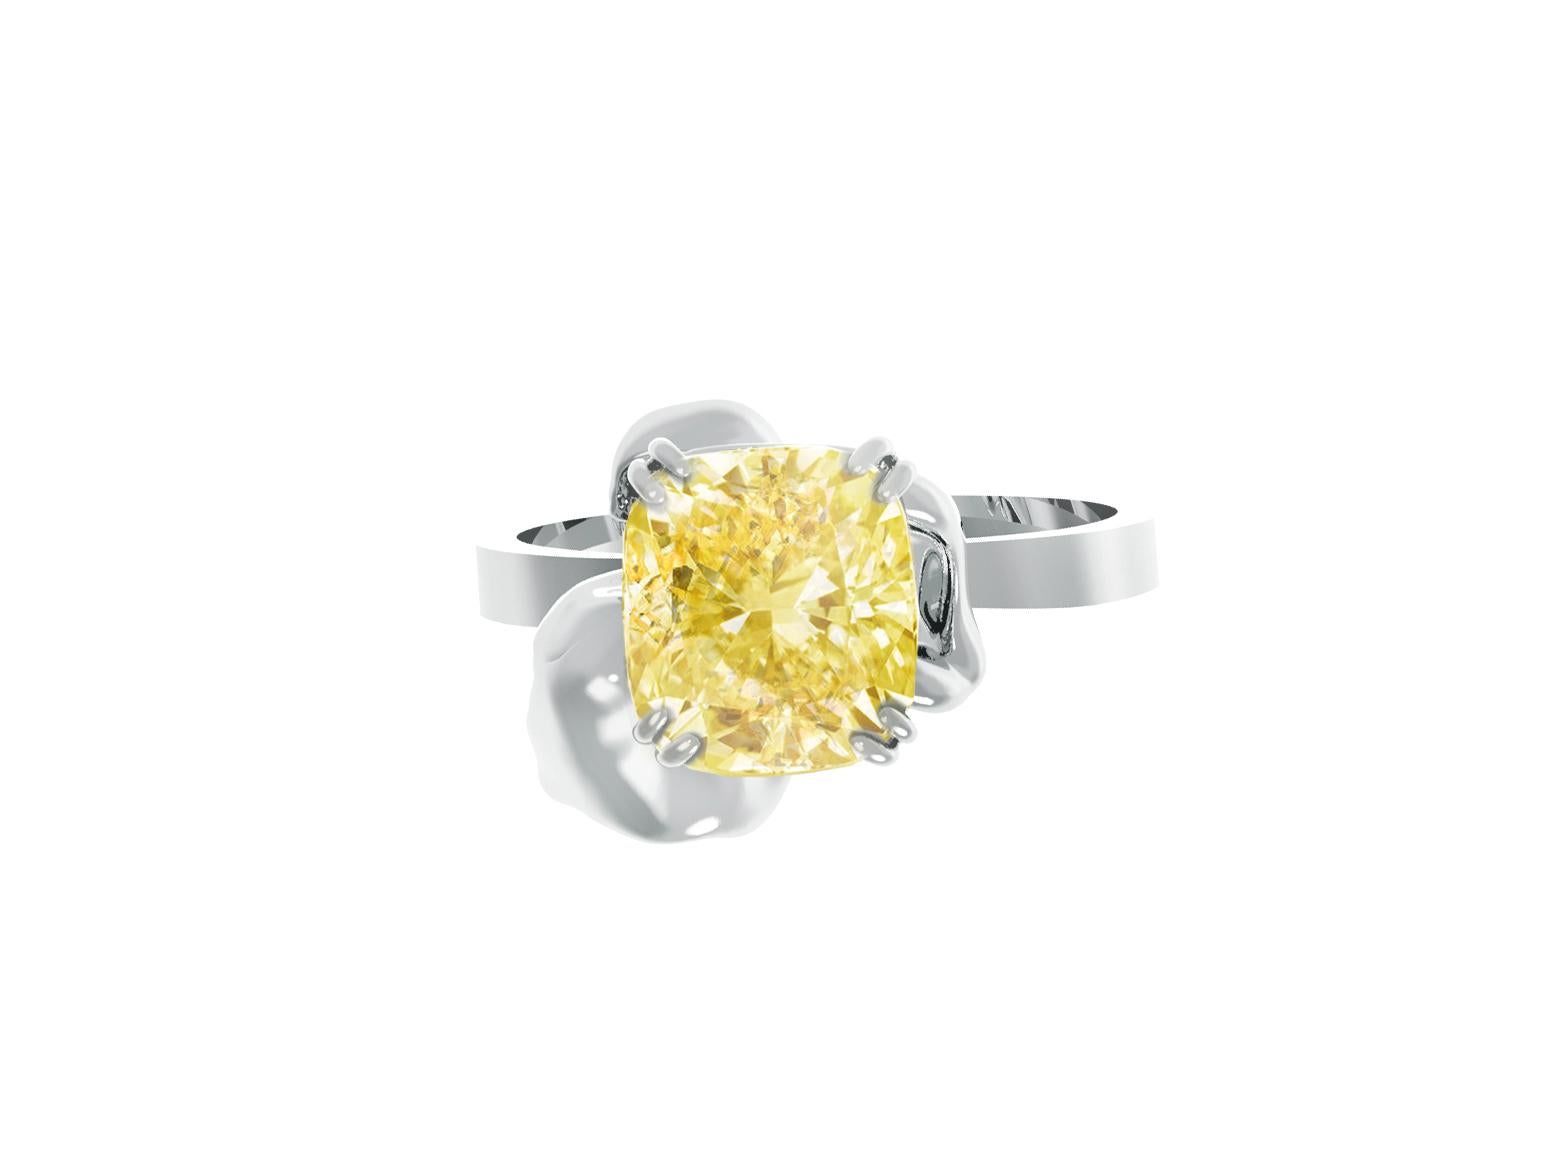 This Flower engagement ring is made of 18 karat white gold and features certified crushed ice cushion cut fancy yellow diamond, weighing 2.2 carats. The certificate for the piece is available upon request. The ring boasts excellent cut work and